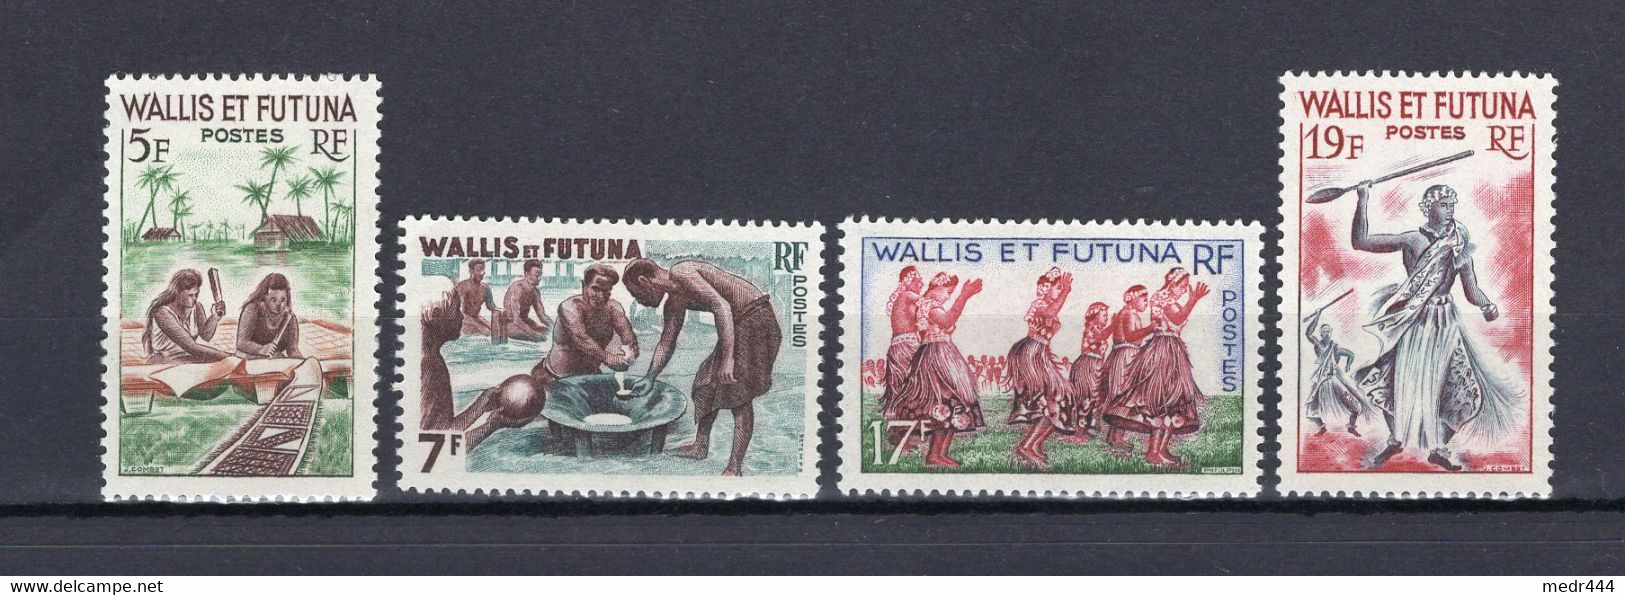 Wallis And Futuna 1960 - Local Motives - Stamps 4v - Complete Set - MNH** - Superb*** - Covers & Documents